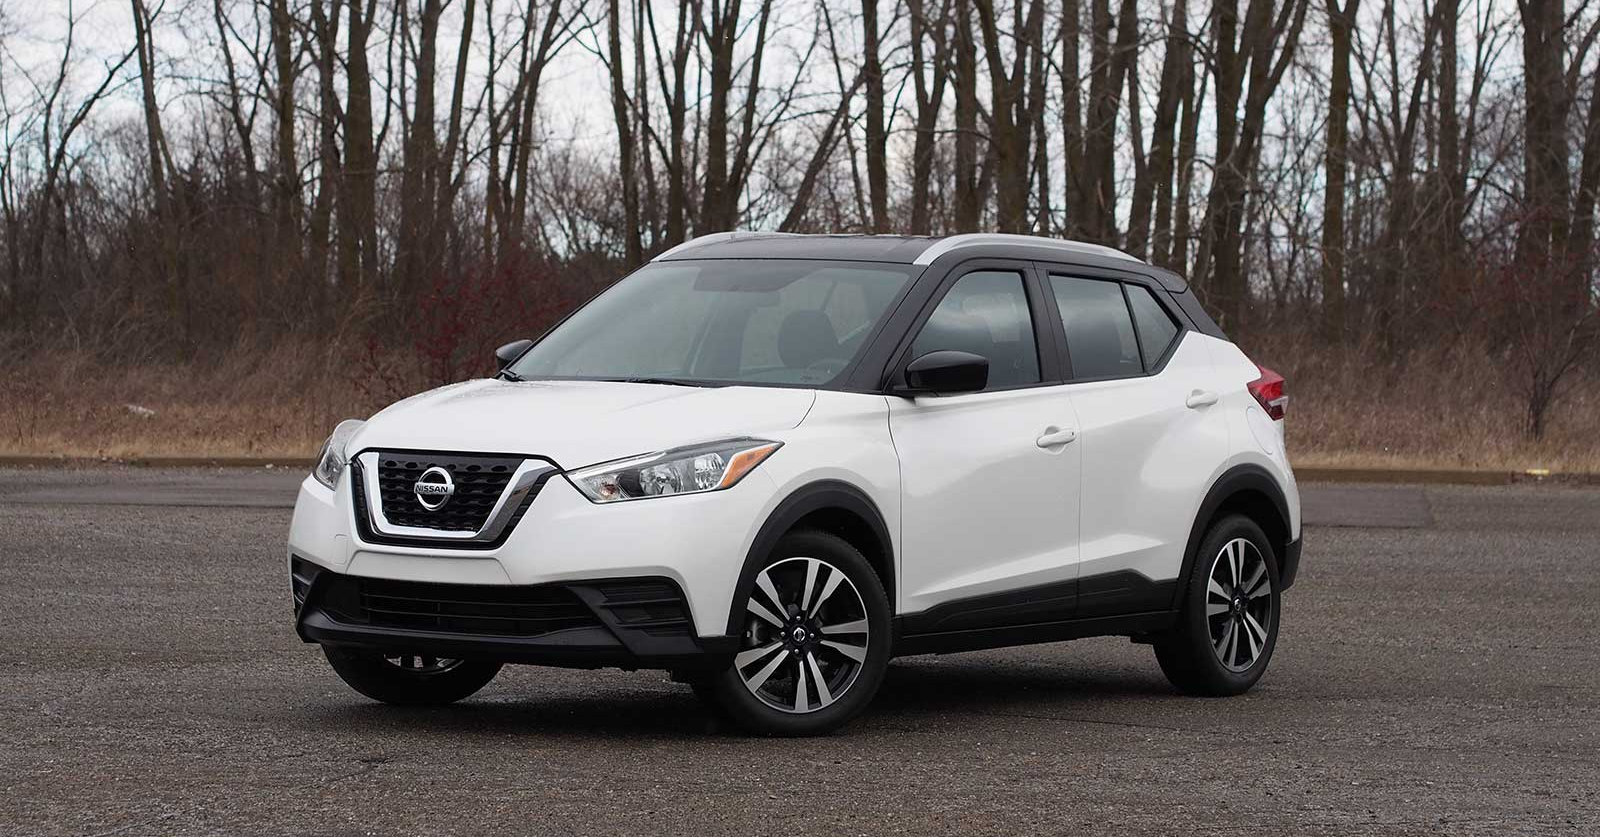 Can the Nissan Kicks Live Up to Your Expectations?